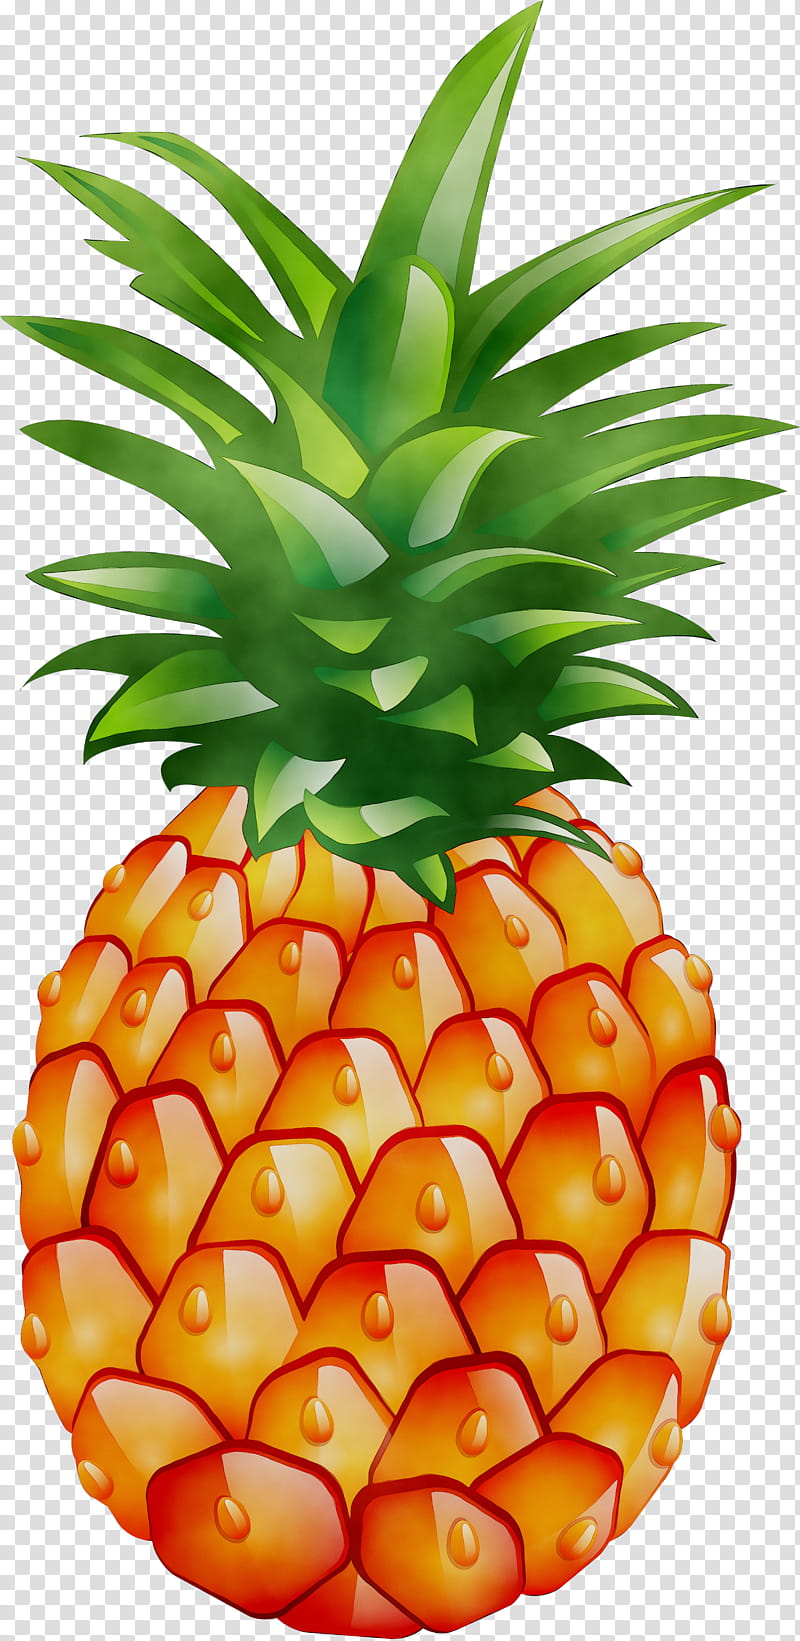 Food, Pineapple, Logo, Strawberry, Squad, Local Food, Ananas, Natural Foods transparent background PNG clipart